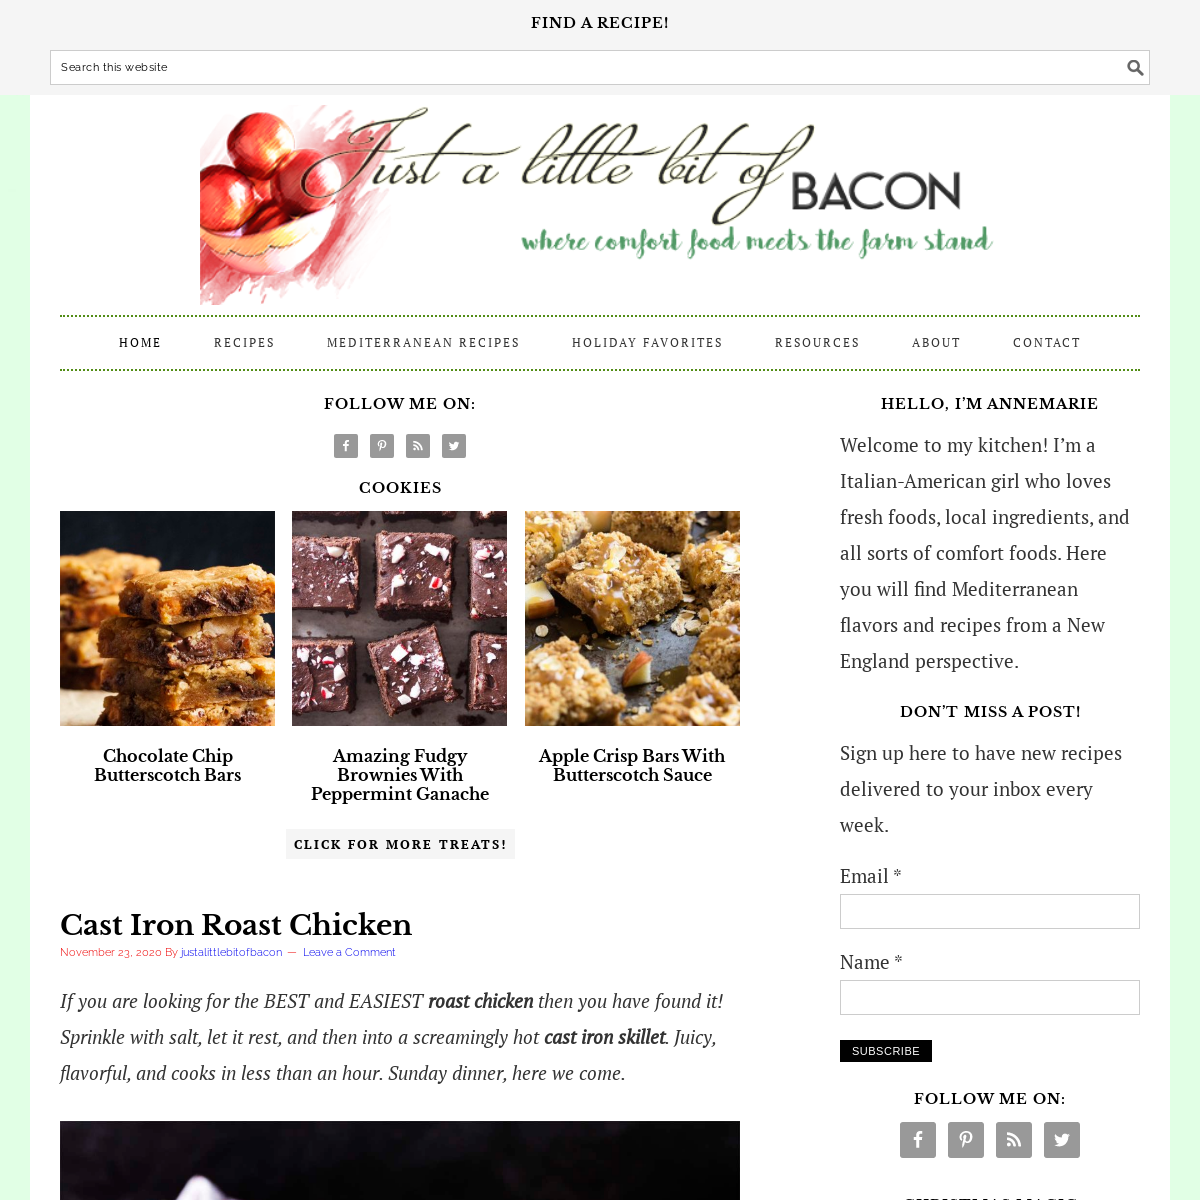 A complete backup of justalittlebitofbacon.com